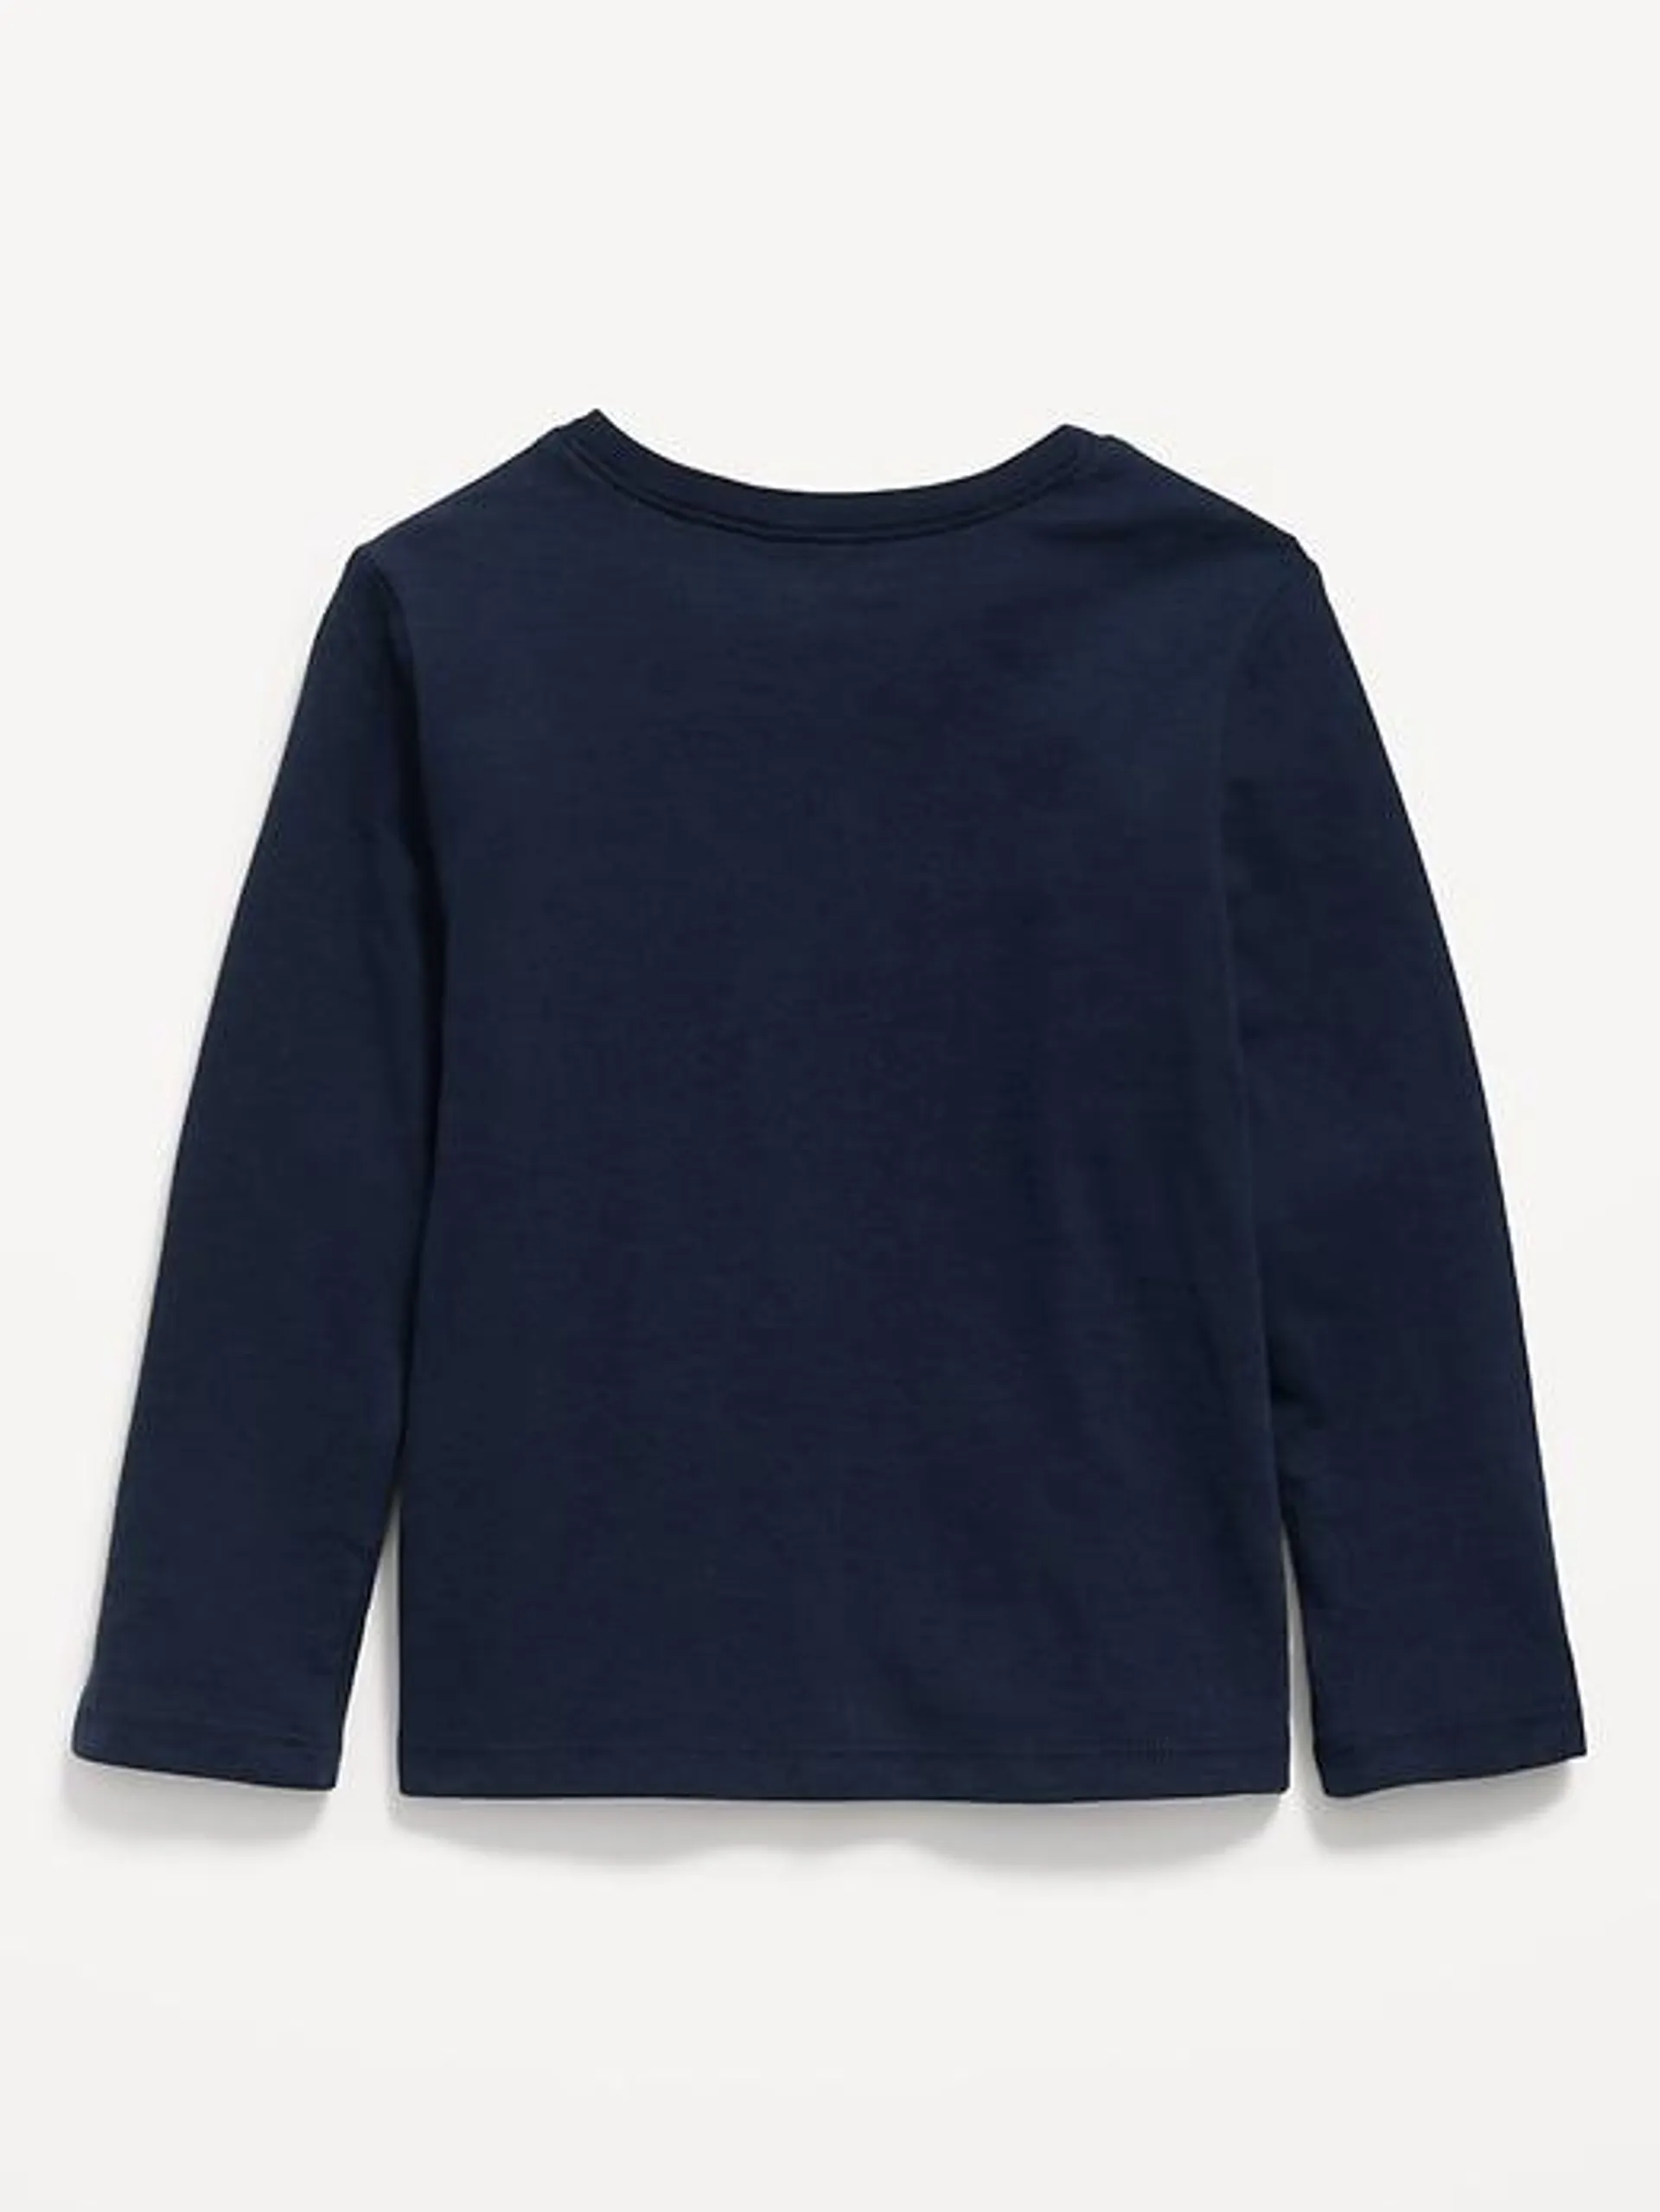 Unisex Long-Sleeve Solid T-Shirt for Toddler